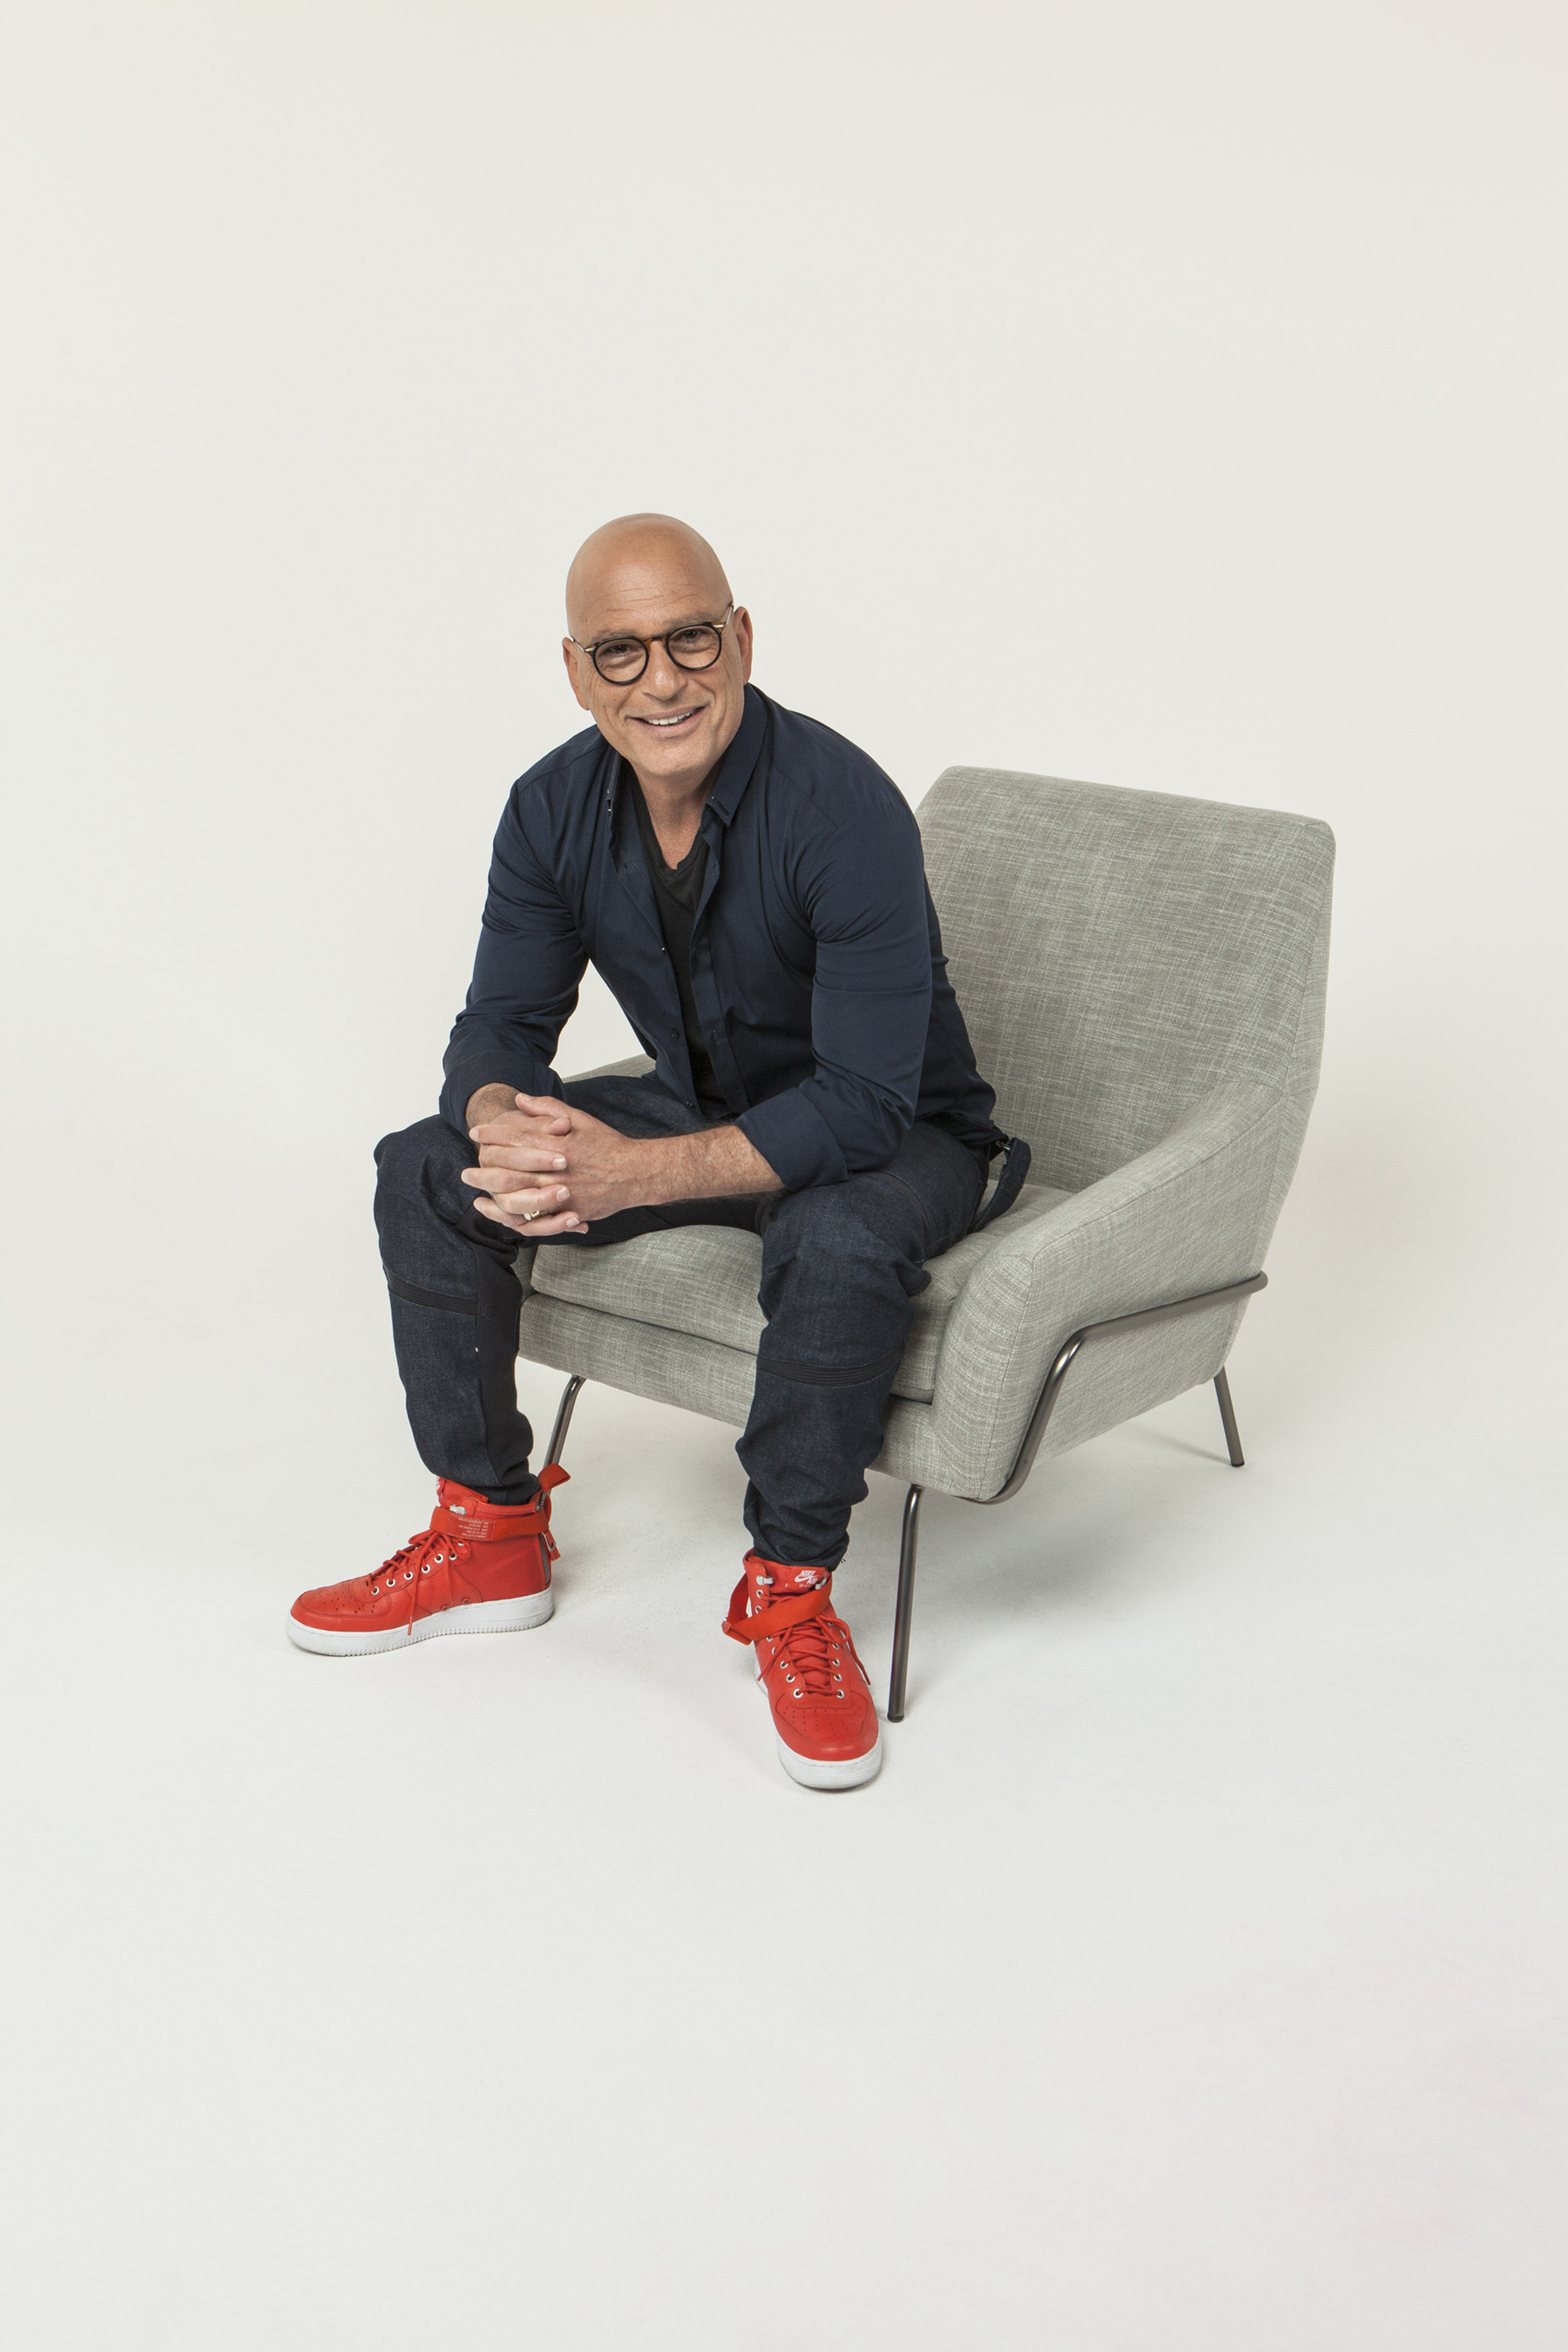 Howie Mandel joins Take Cholesterol to Heart, a national education campaign from Kowa Pharmaceuticals America, Inc.